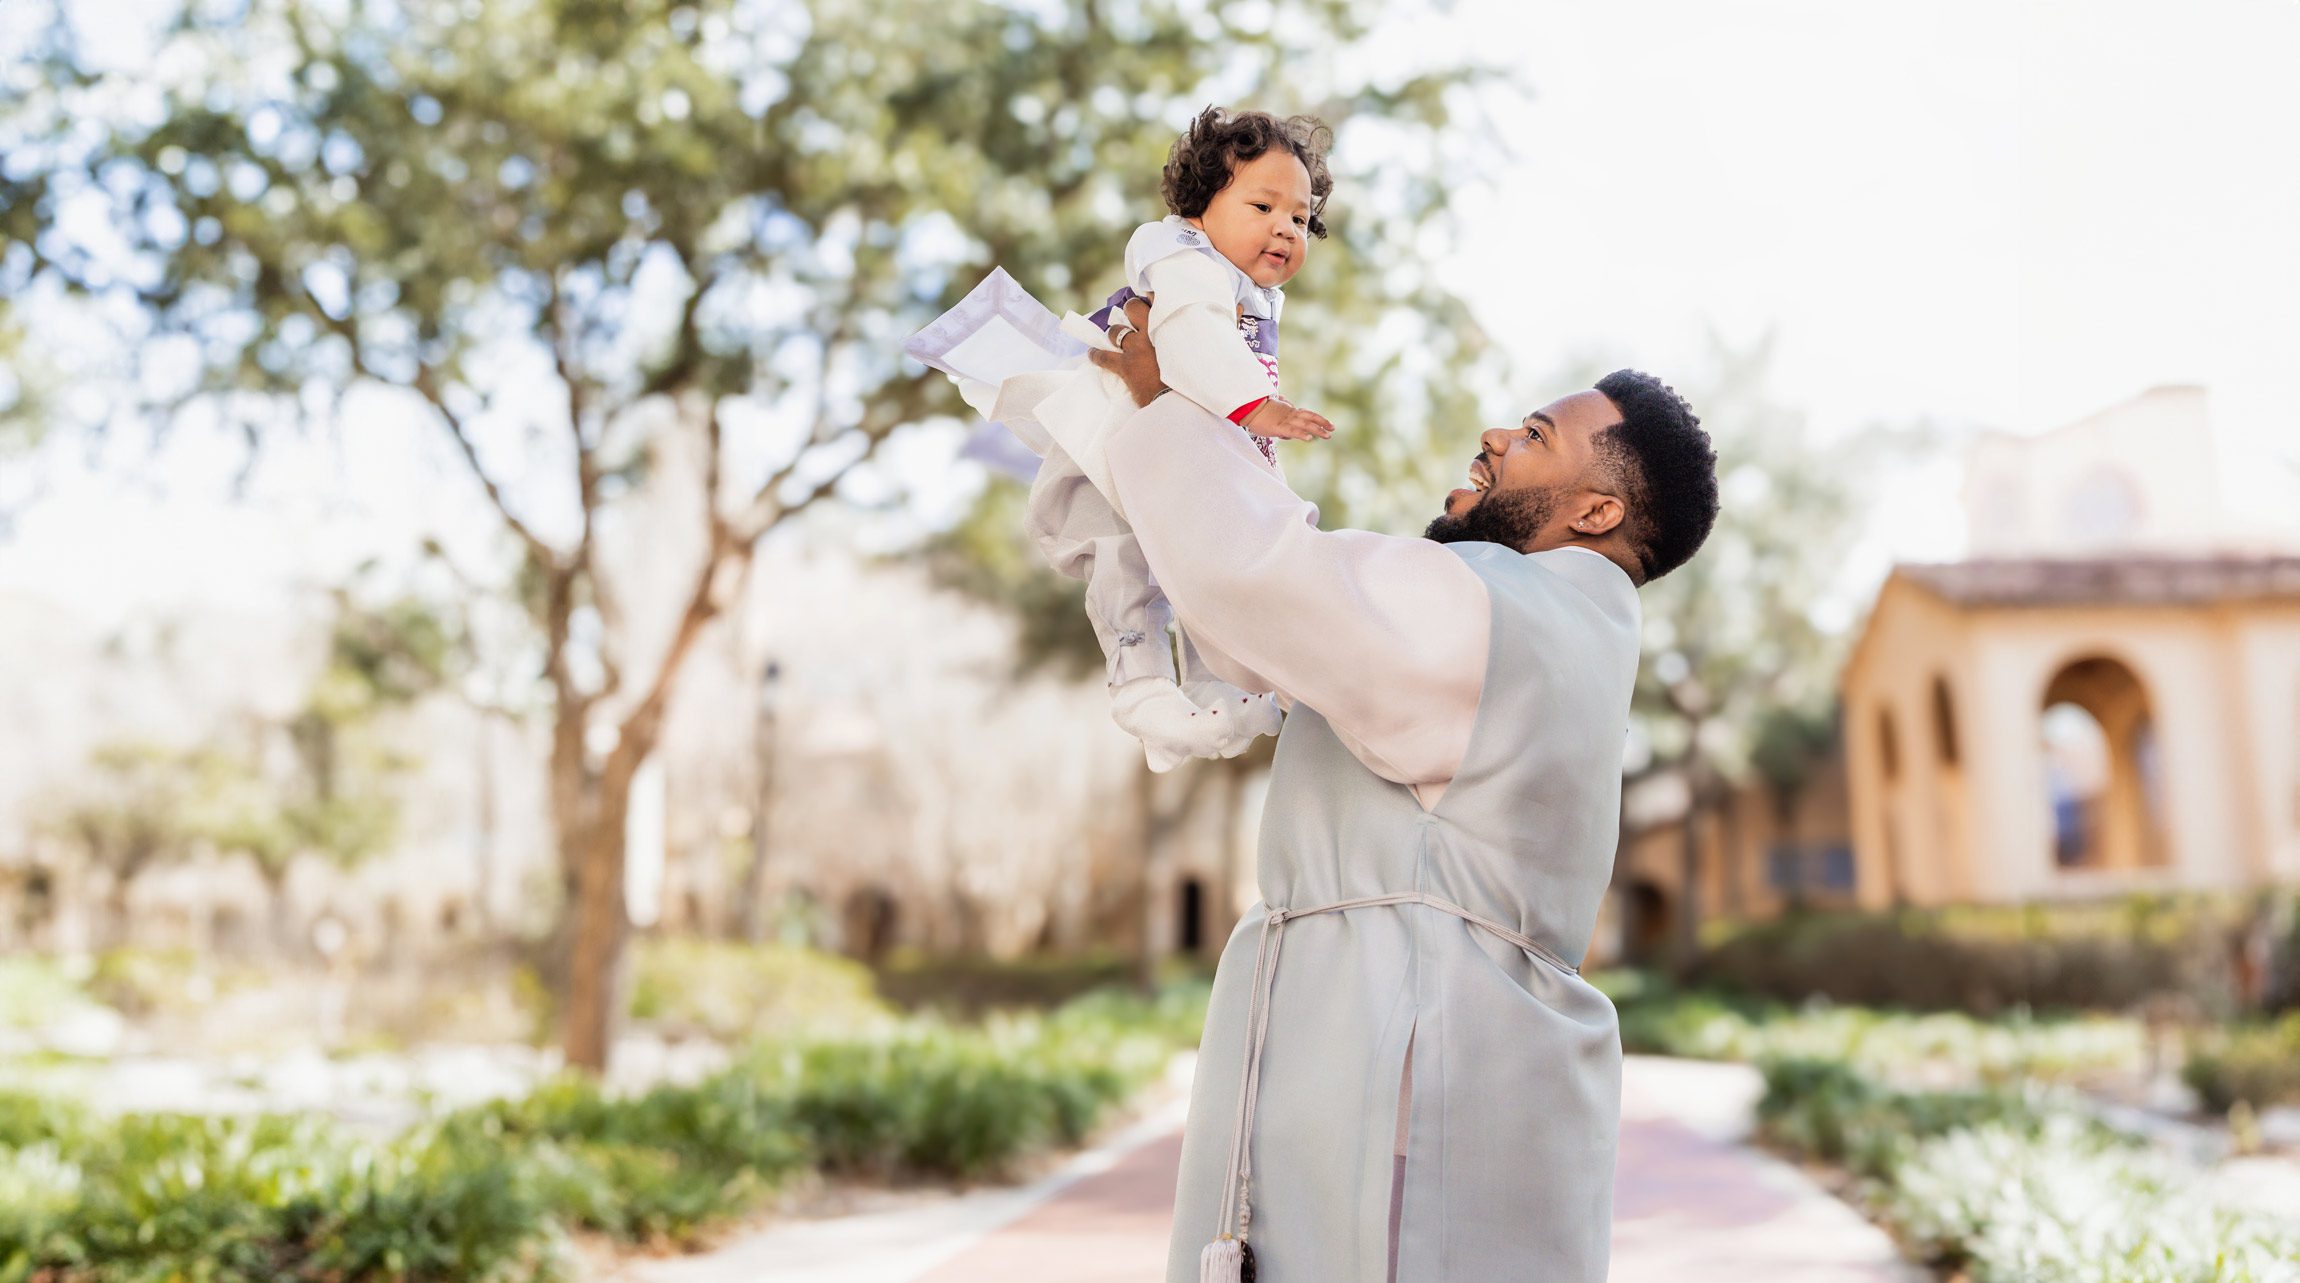 father wearing hanbok throwing baby in the air